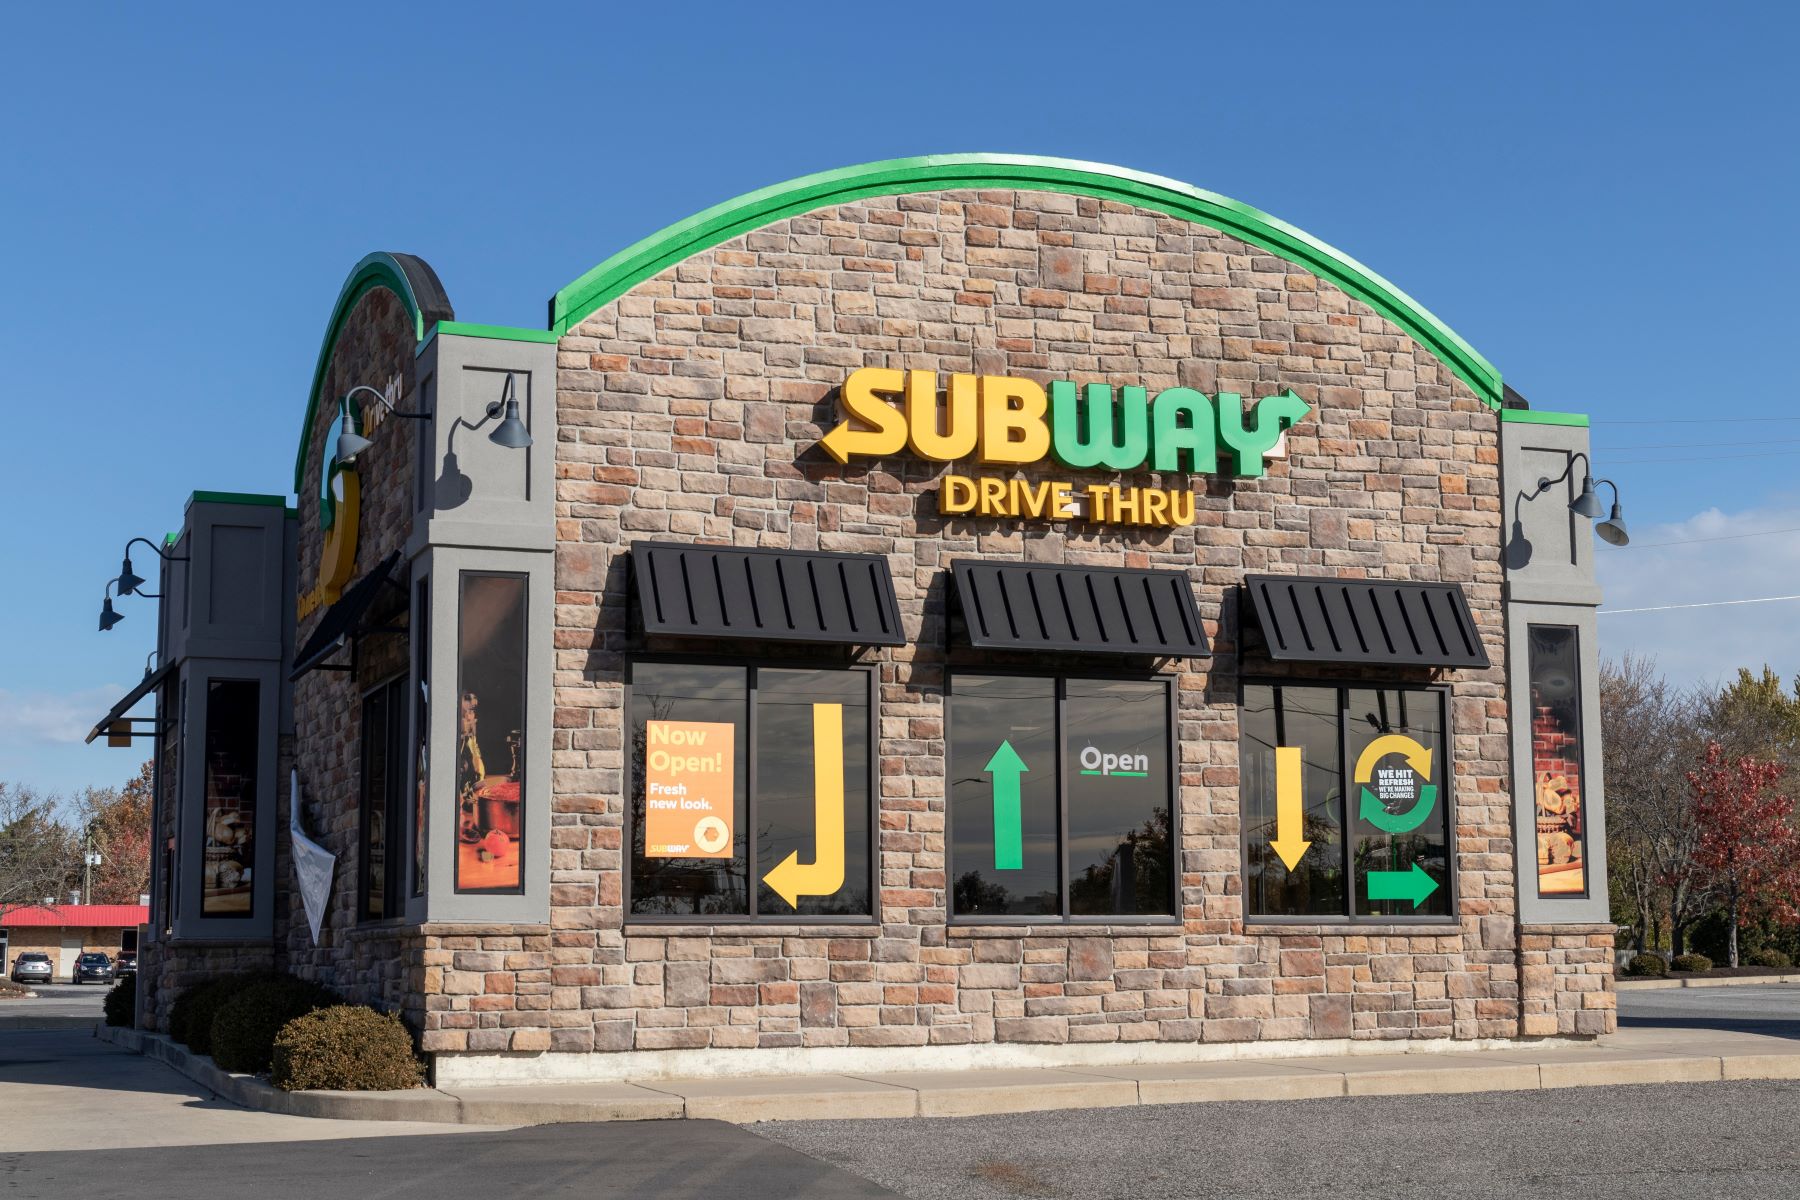 Subway’s Business Scale Changed Drastically After California’s Minimum Wage Law Came Into Effect